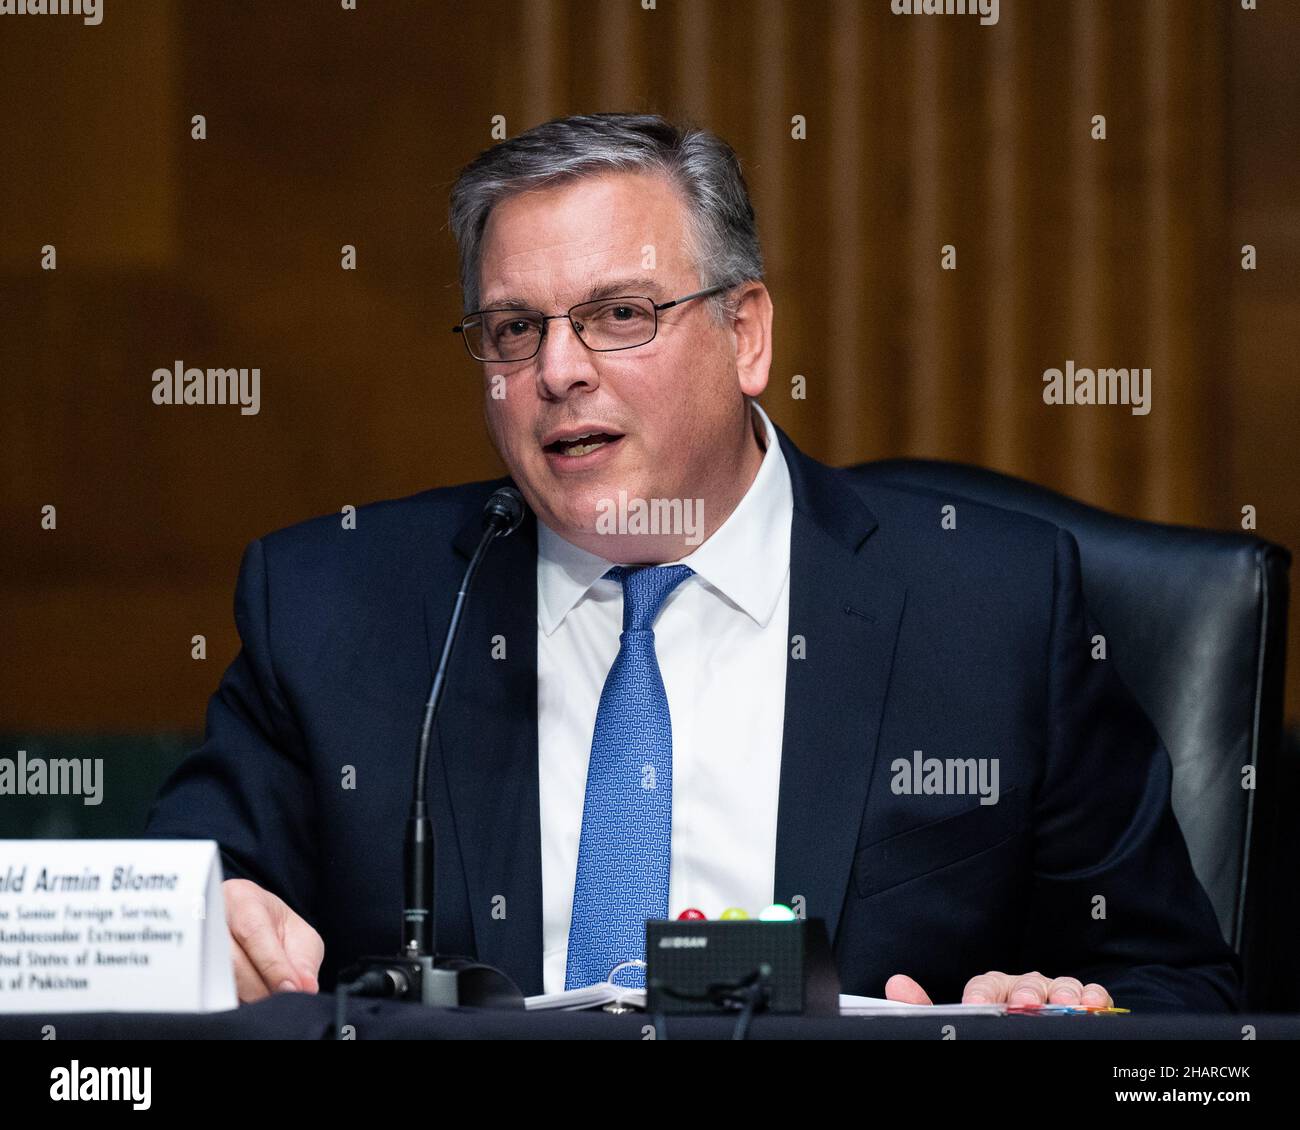 Washington, U.S. 14th Dec, 2021. December 14, 2021 - Washington, DC, United States: Donald Blome, nominee to be Ambassador to the Islamic Republic of Pakistan, speaking at a hearing of the Senate Foreign Relations Committee Hearing. (Photo by Michael Brochstein/Sipa USA) Credit: Sipa USA/Alamy Live News Stock Photo